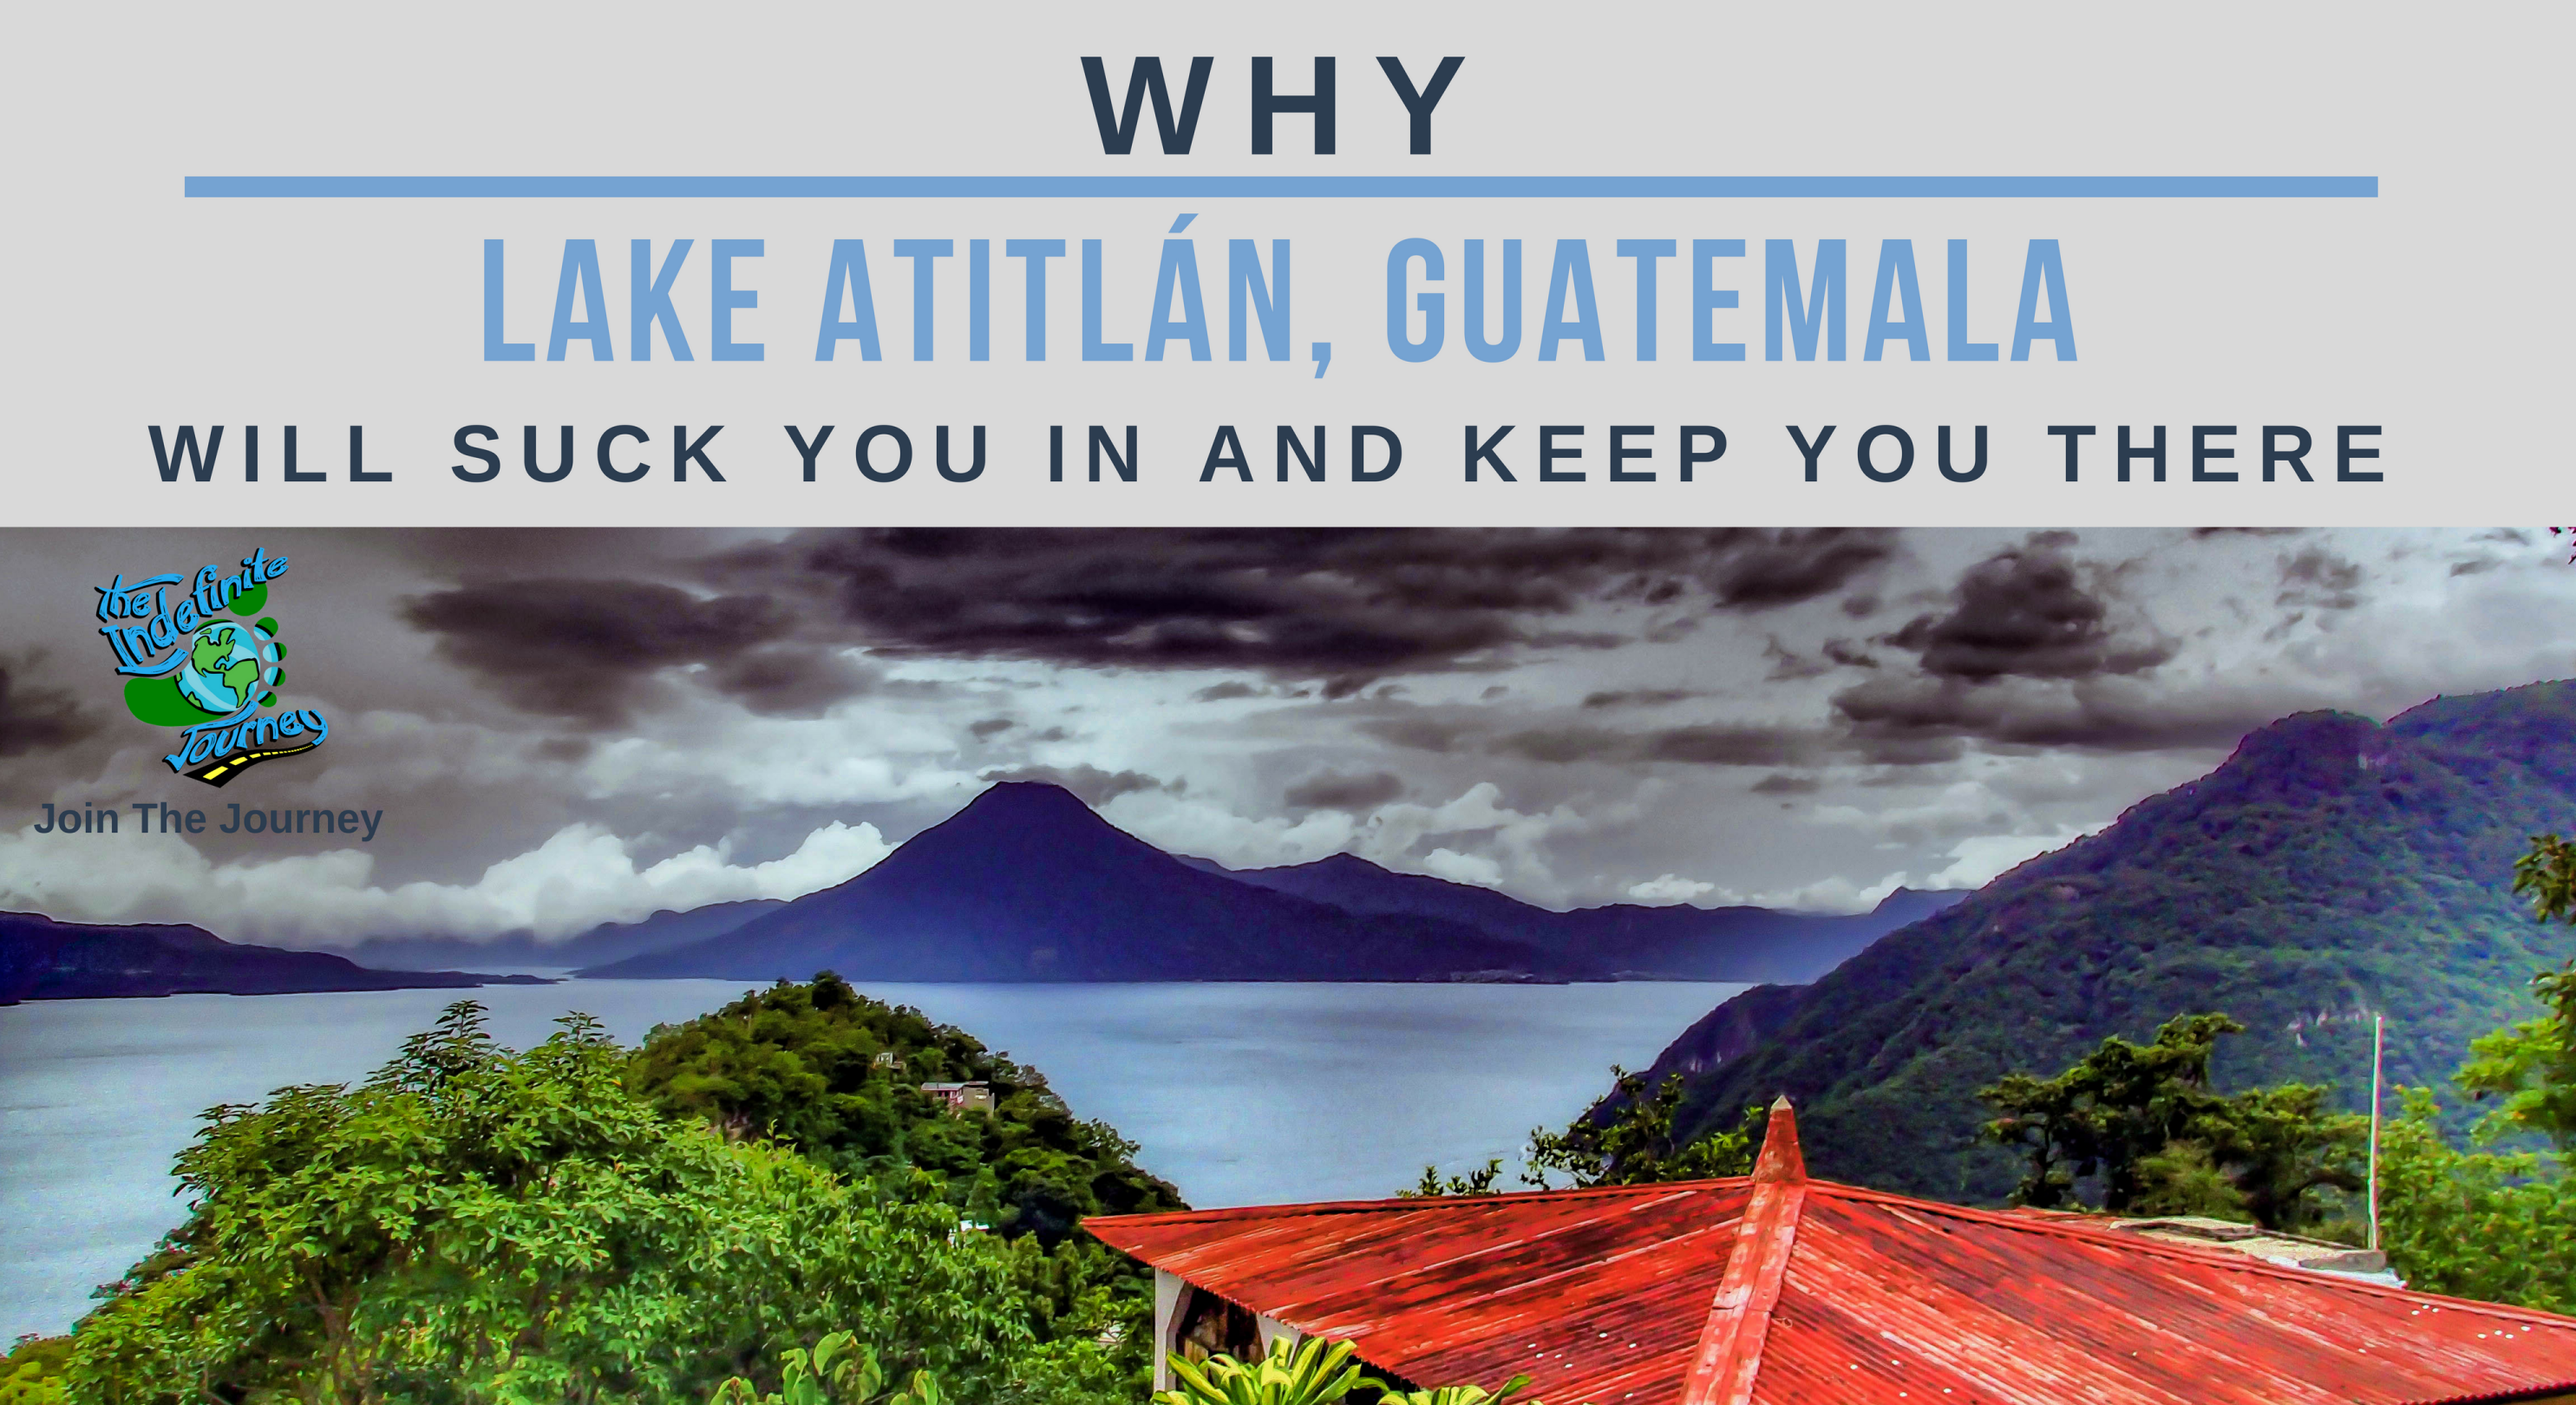 Why Lake Atitlan, Guatemala Will Suck You In And Keep You There